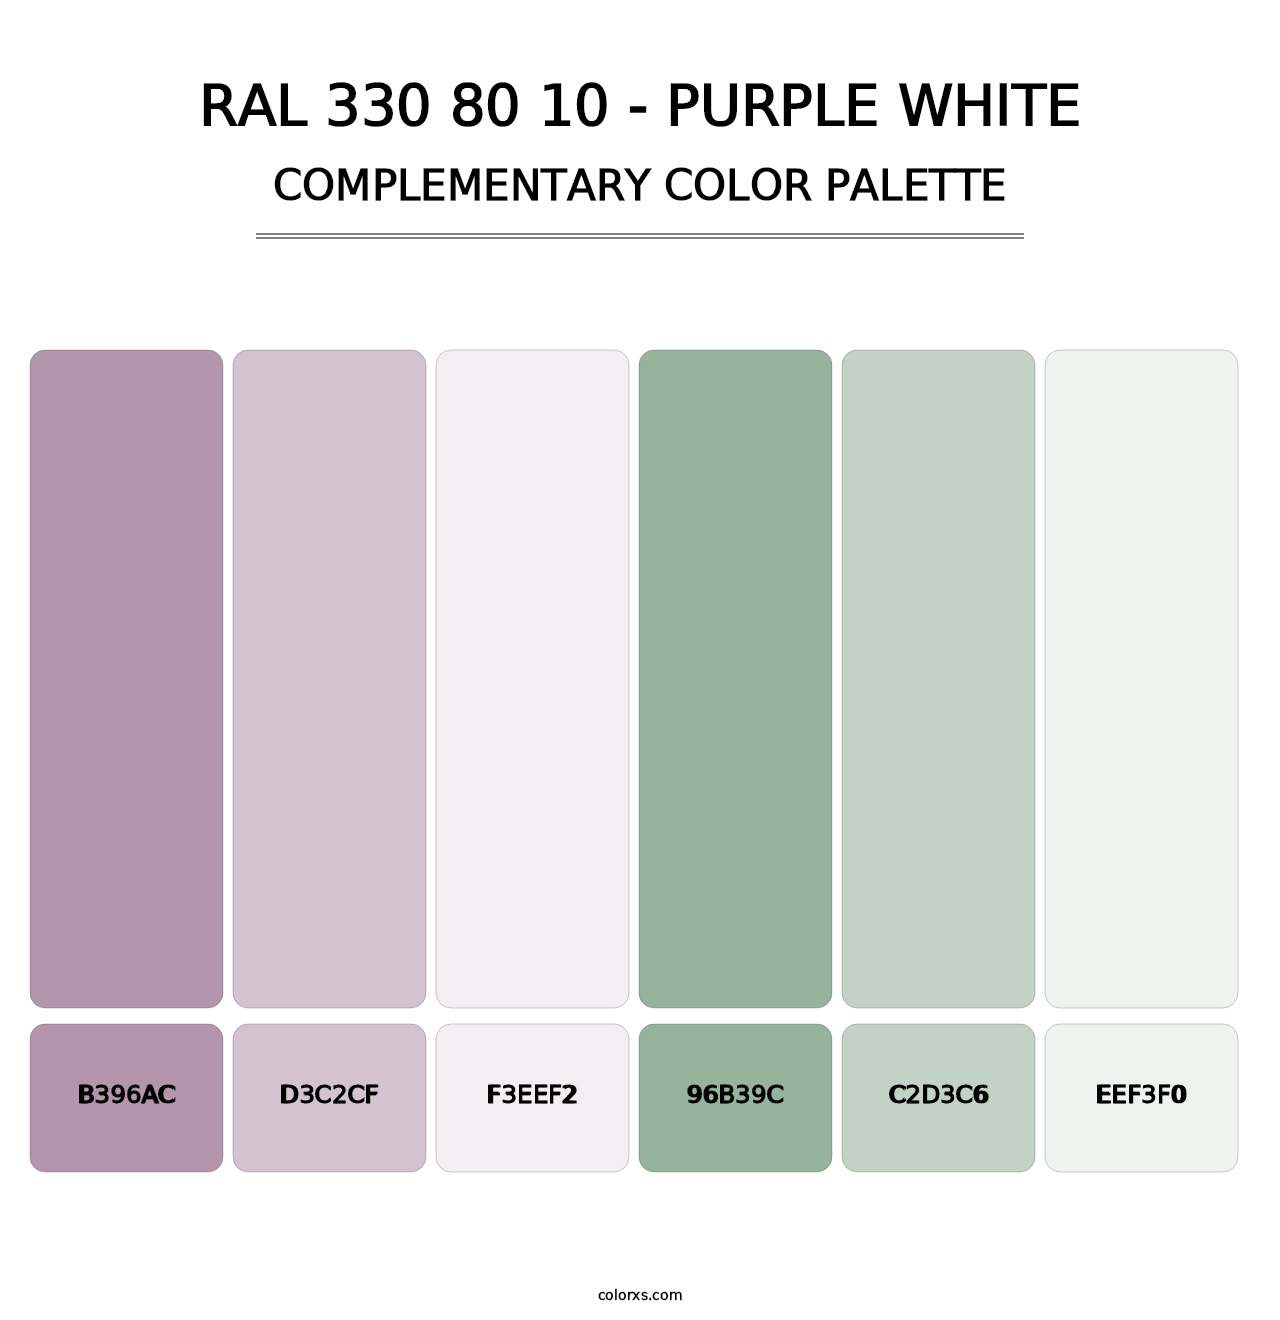 RAL 330 80 10 - Purple White - Complementary Color Palette